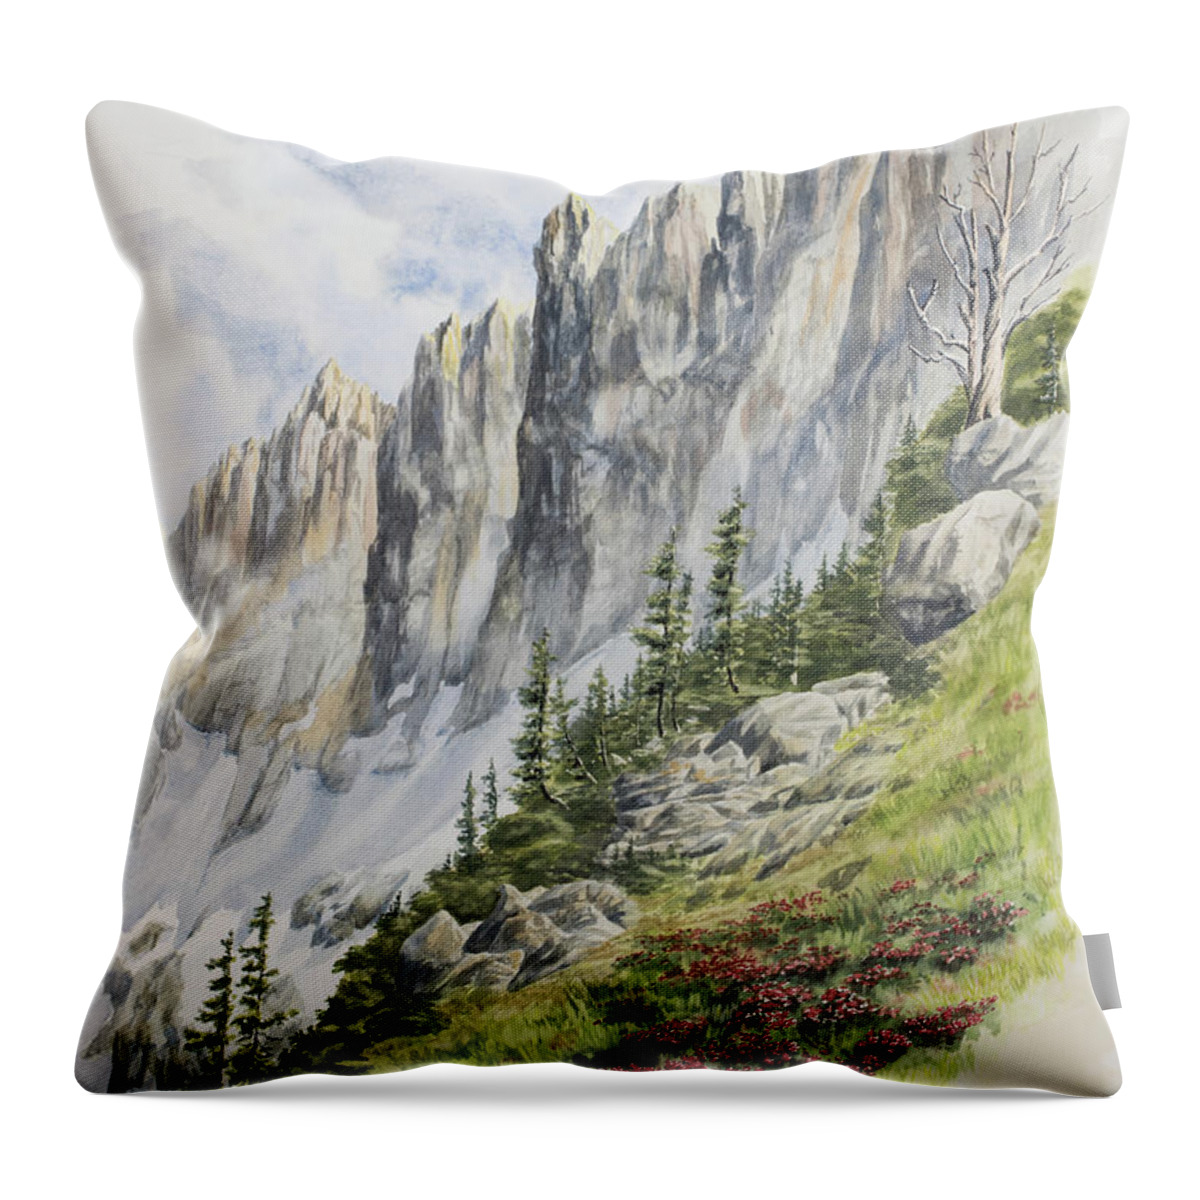 Watercolor Throw Pillow featuring the painting Sawtooth Dream by Link Jackson